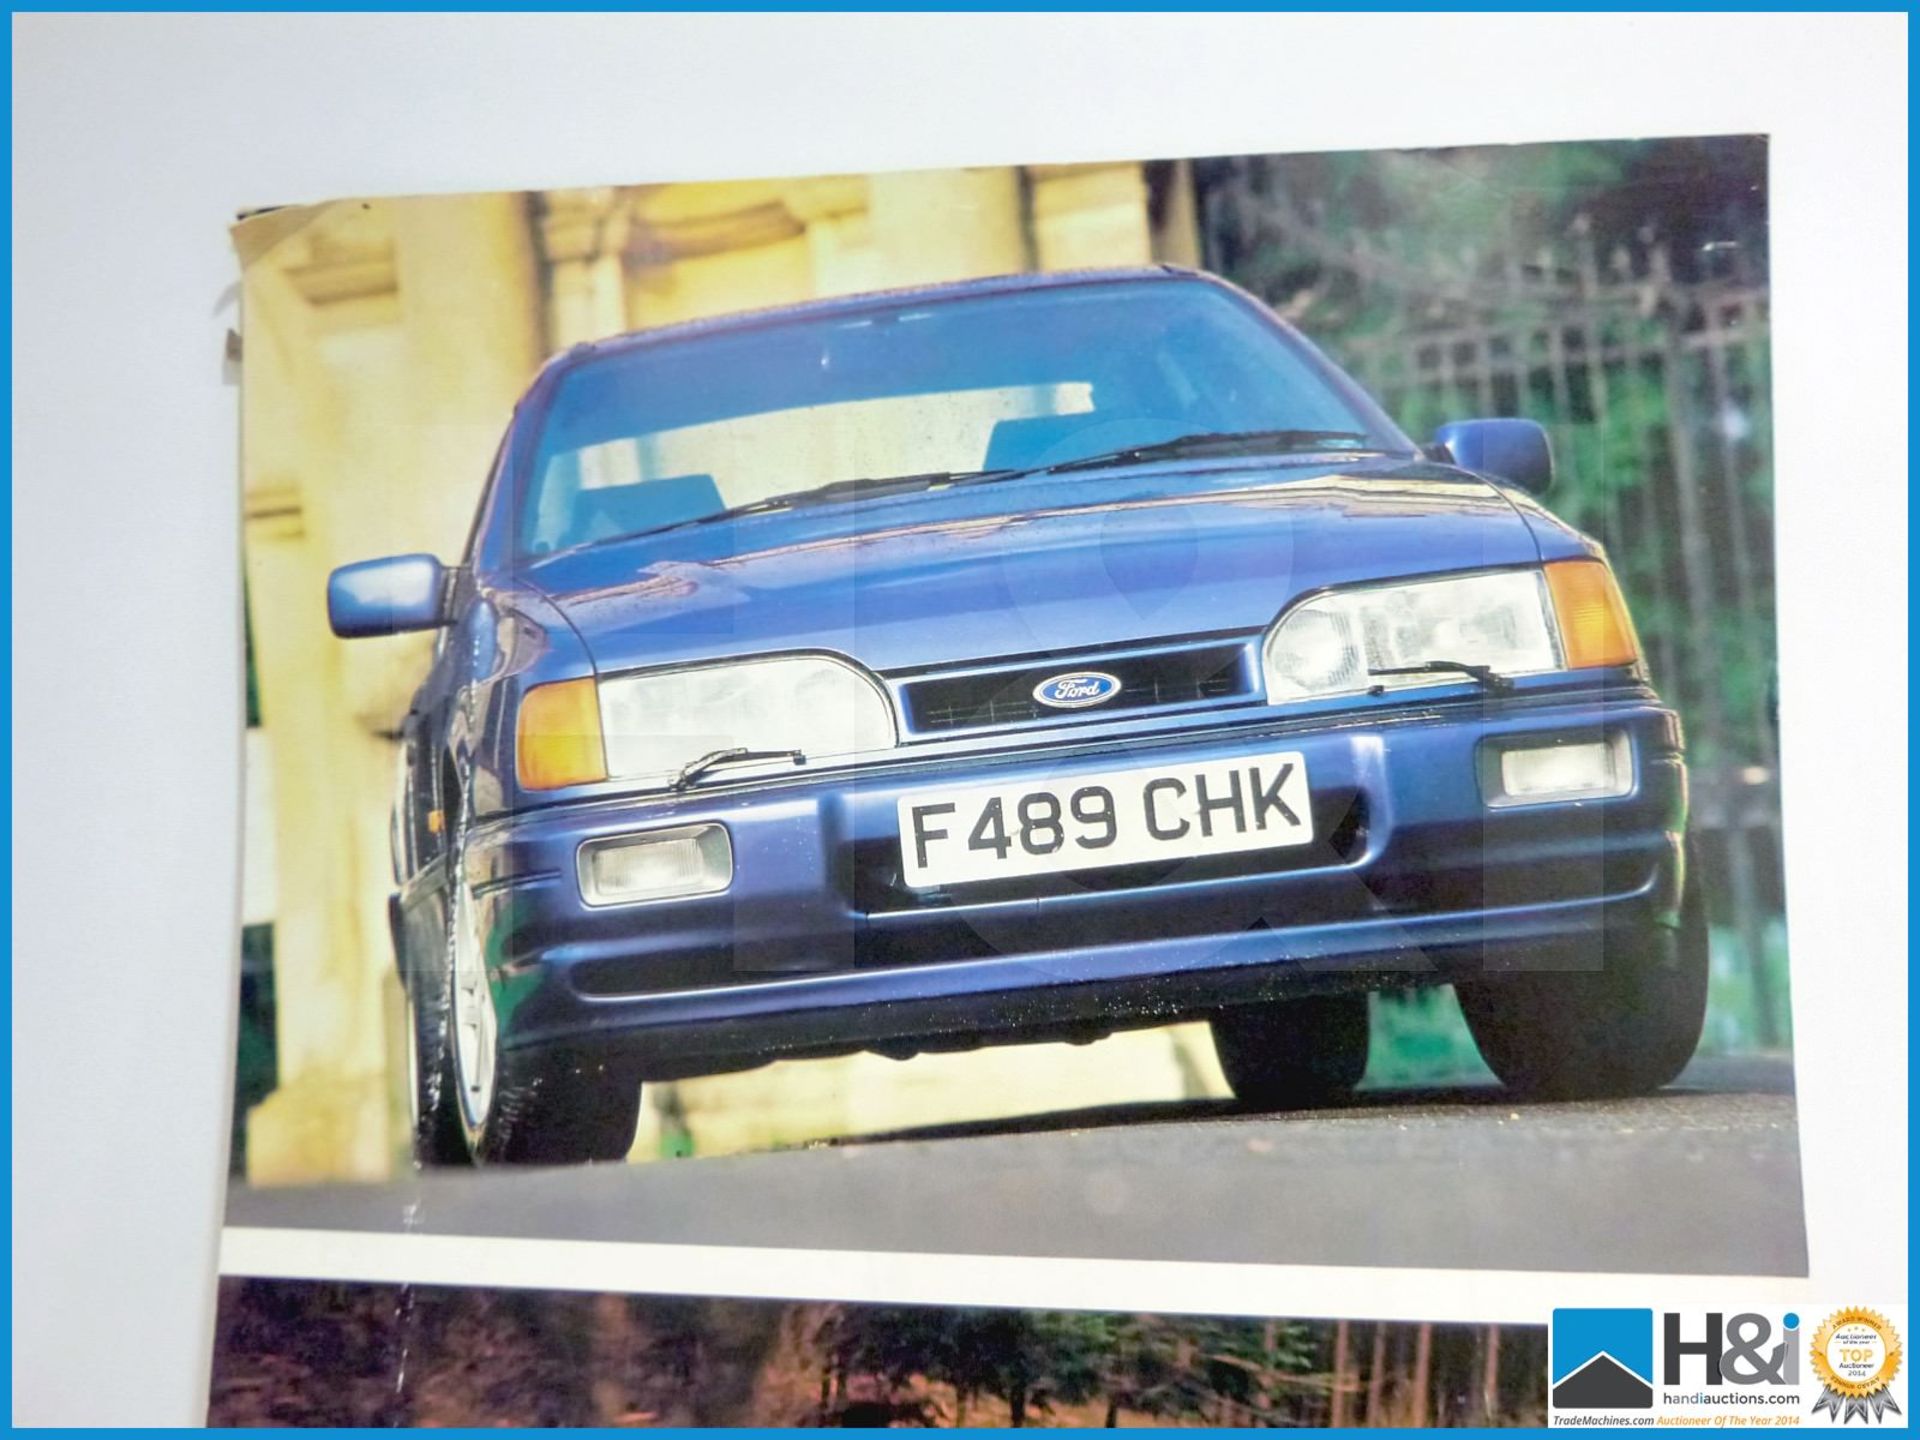 Genuine Ford Sierra Sapphire promo artwork from the Cosworth Archives. Should fire up happy memories - Image 3 of 4